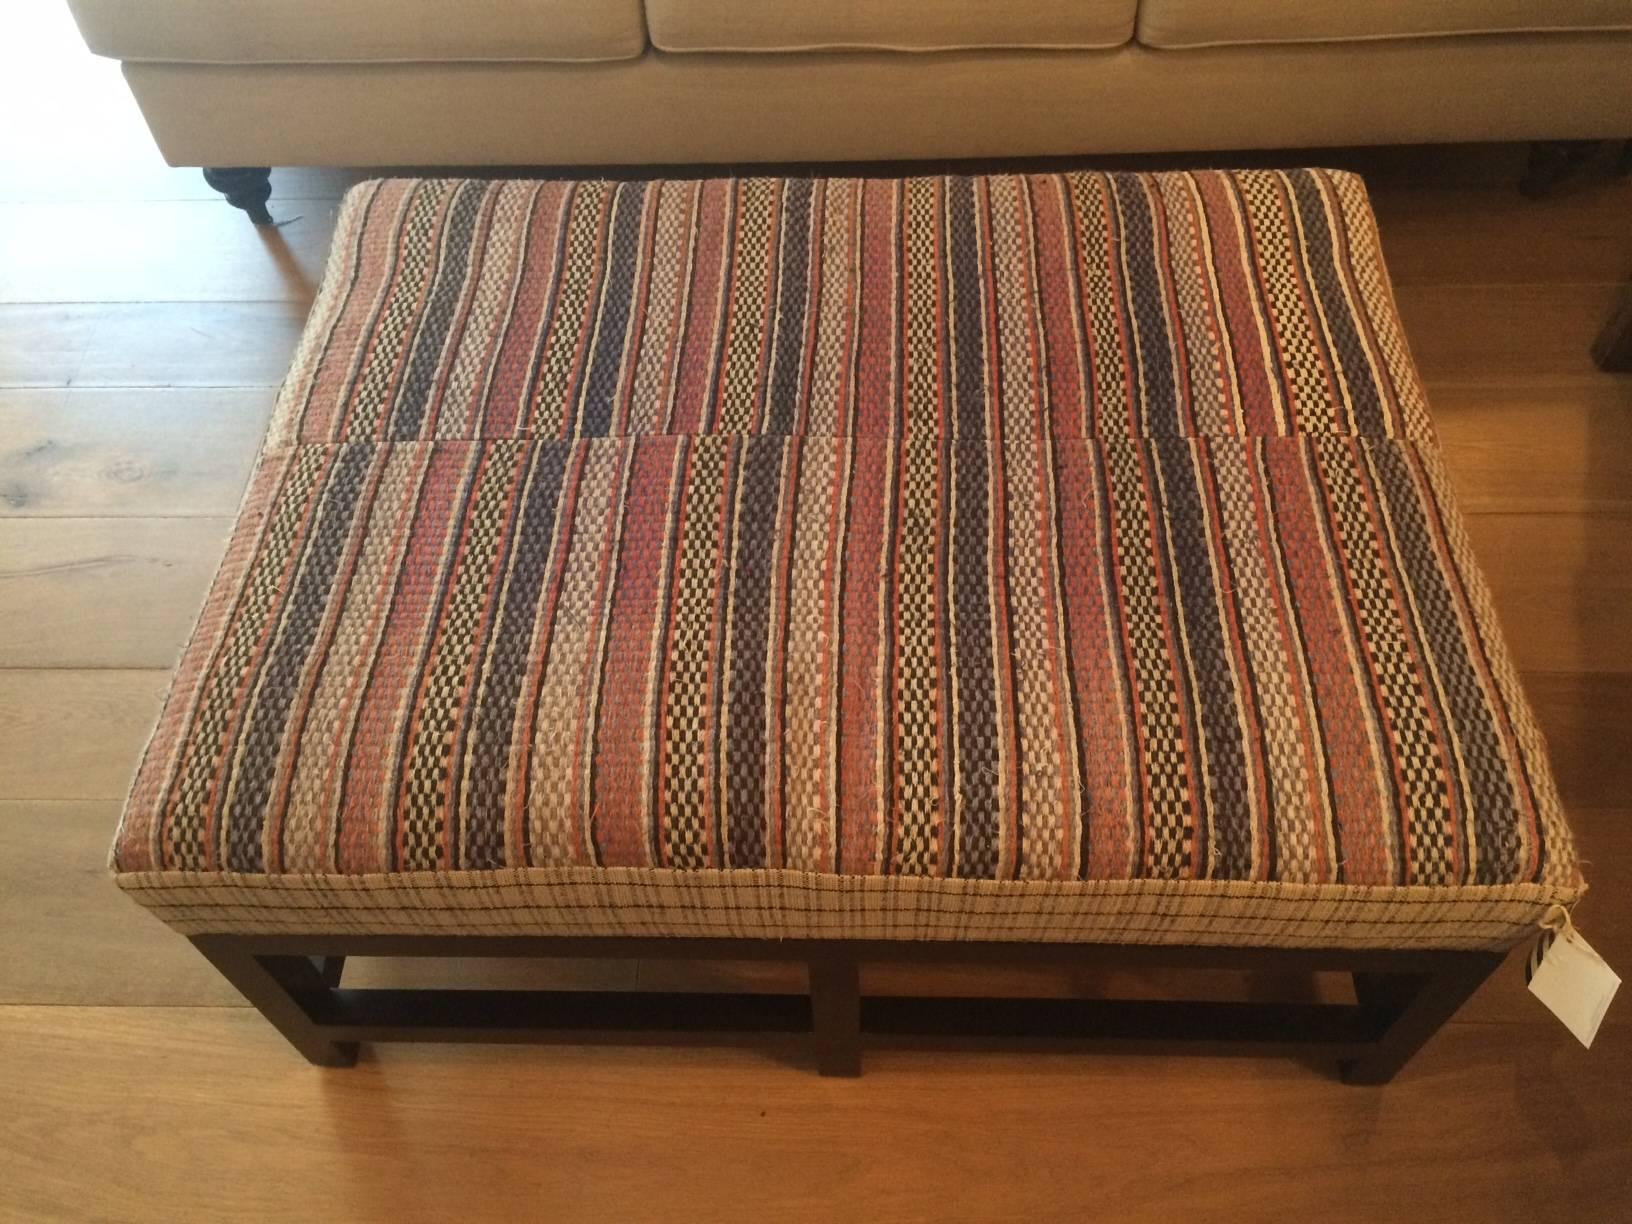 Large Ottoman by Nathan Turner, upholstered with vintage mattress fabric.